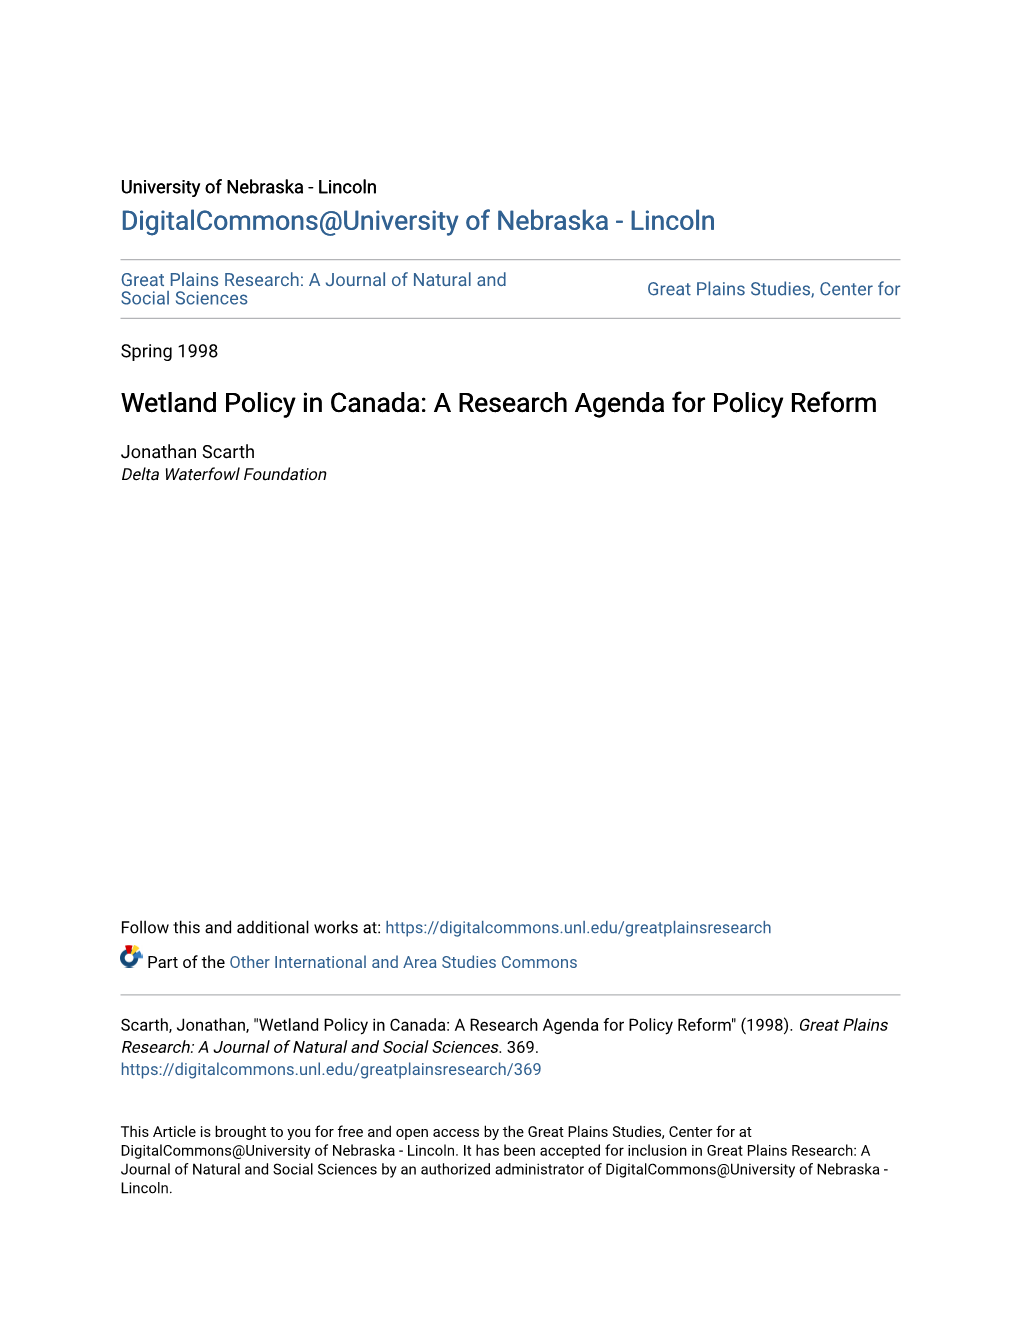 Wetland Policy in Canada: a Research Agenda for Policy Reform